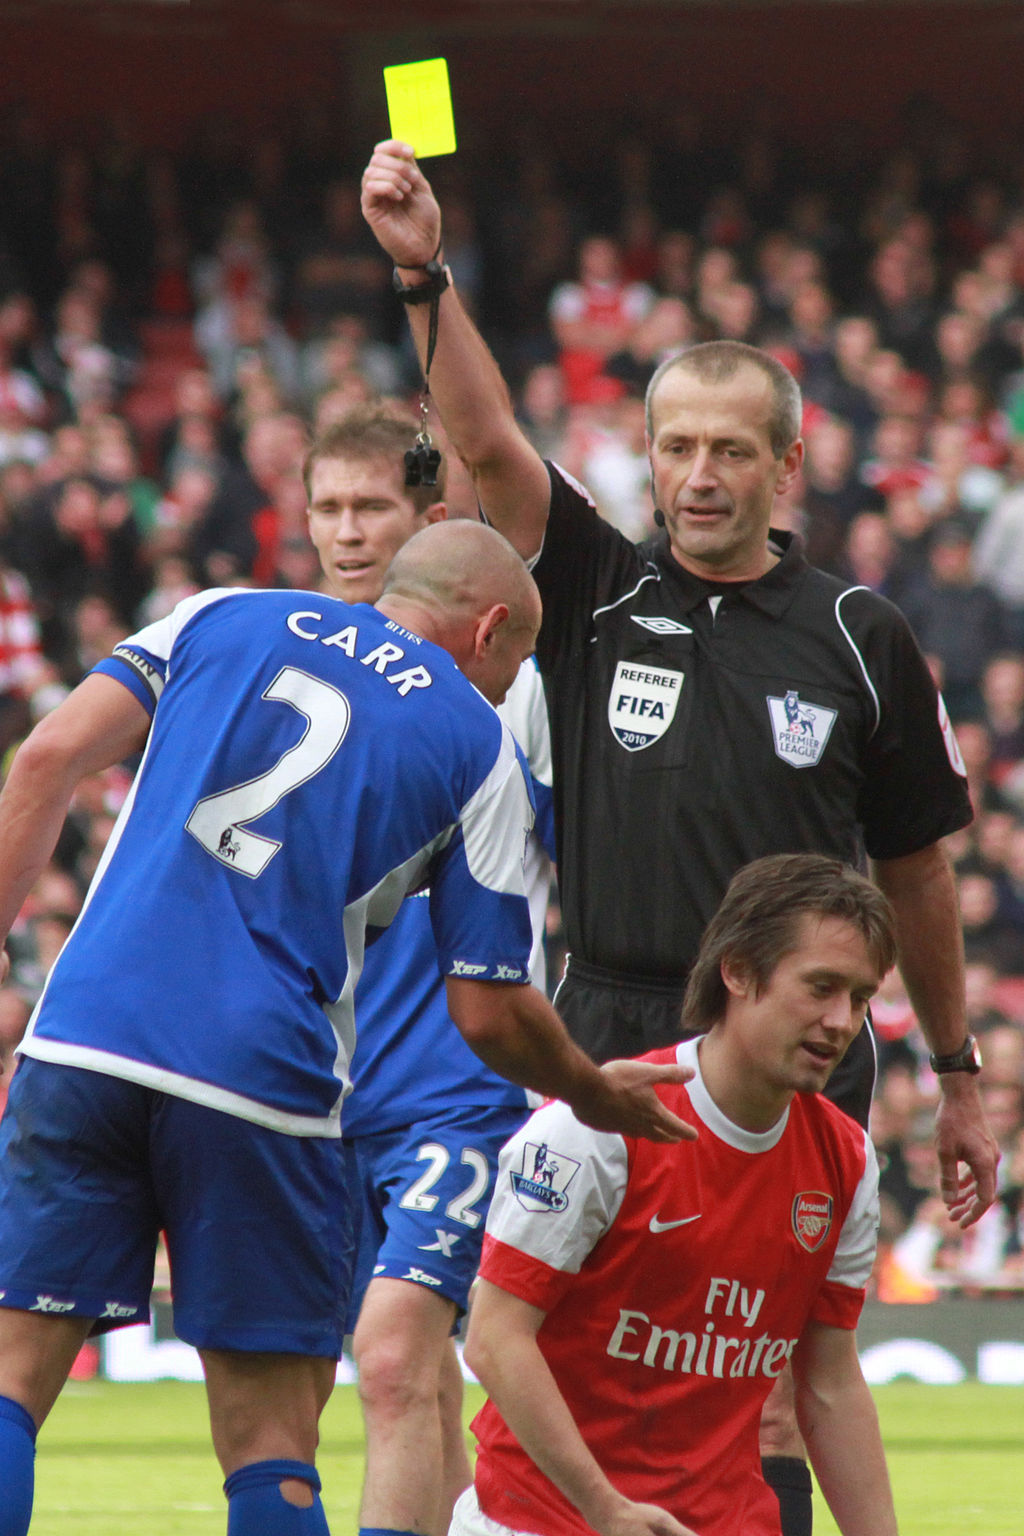 Martin Atkinson is one of the best football referees of all time